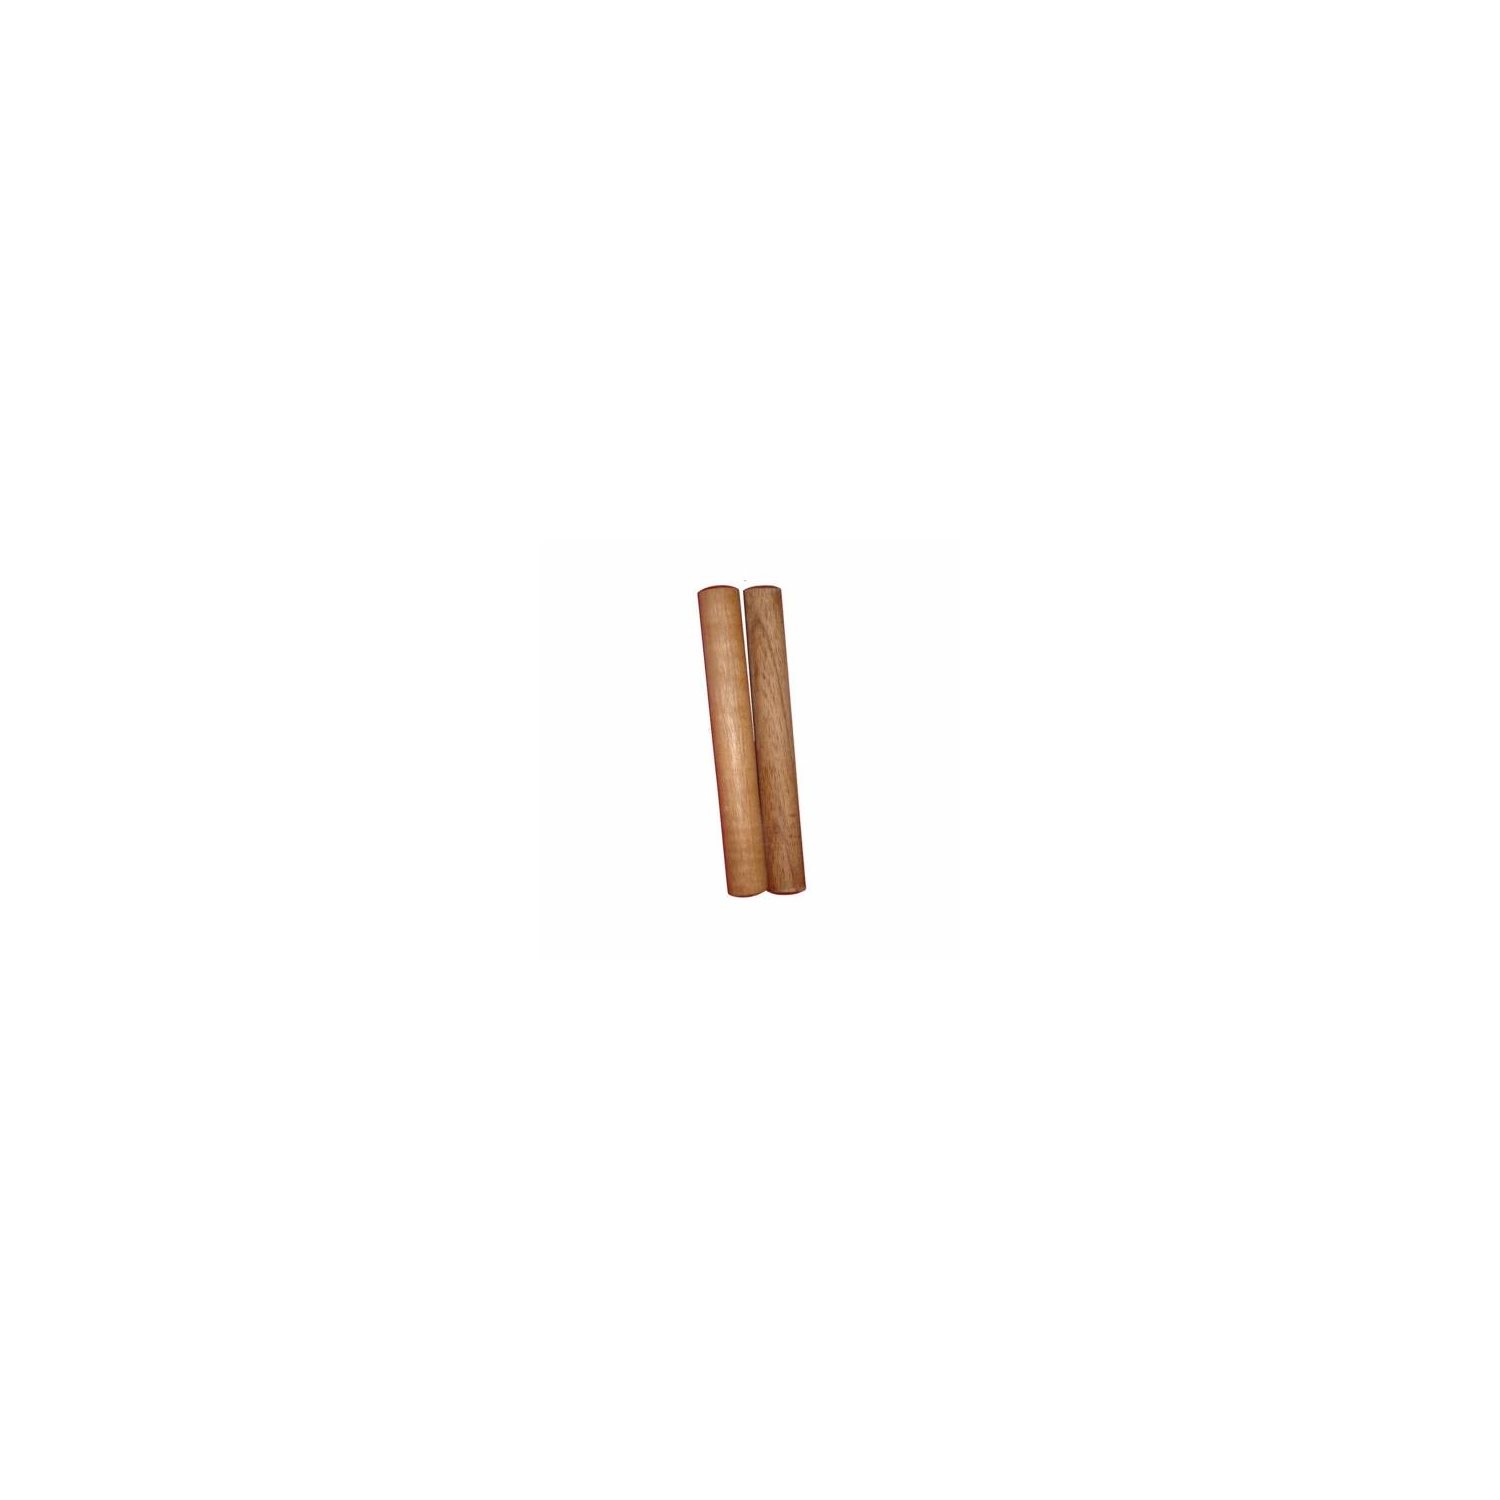 MANO - MPCL - Traditional Wood Claves